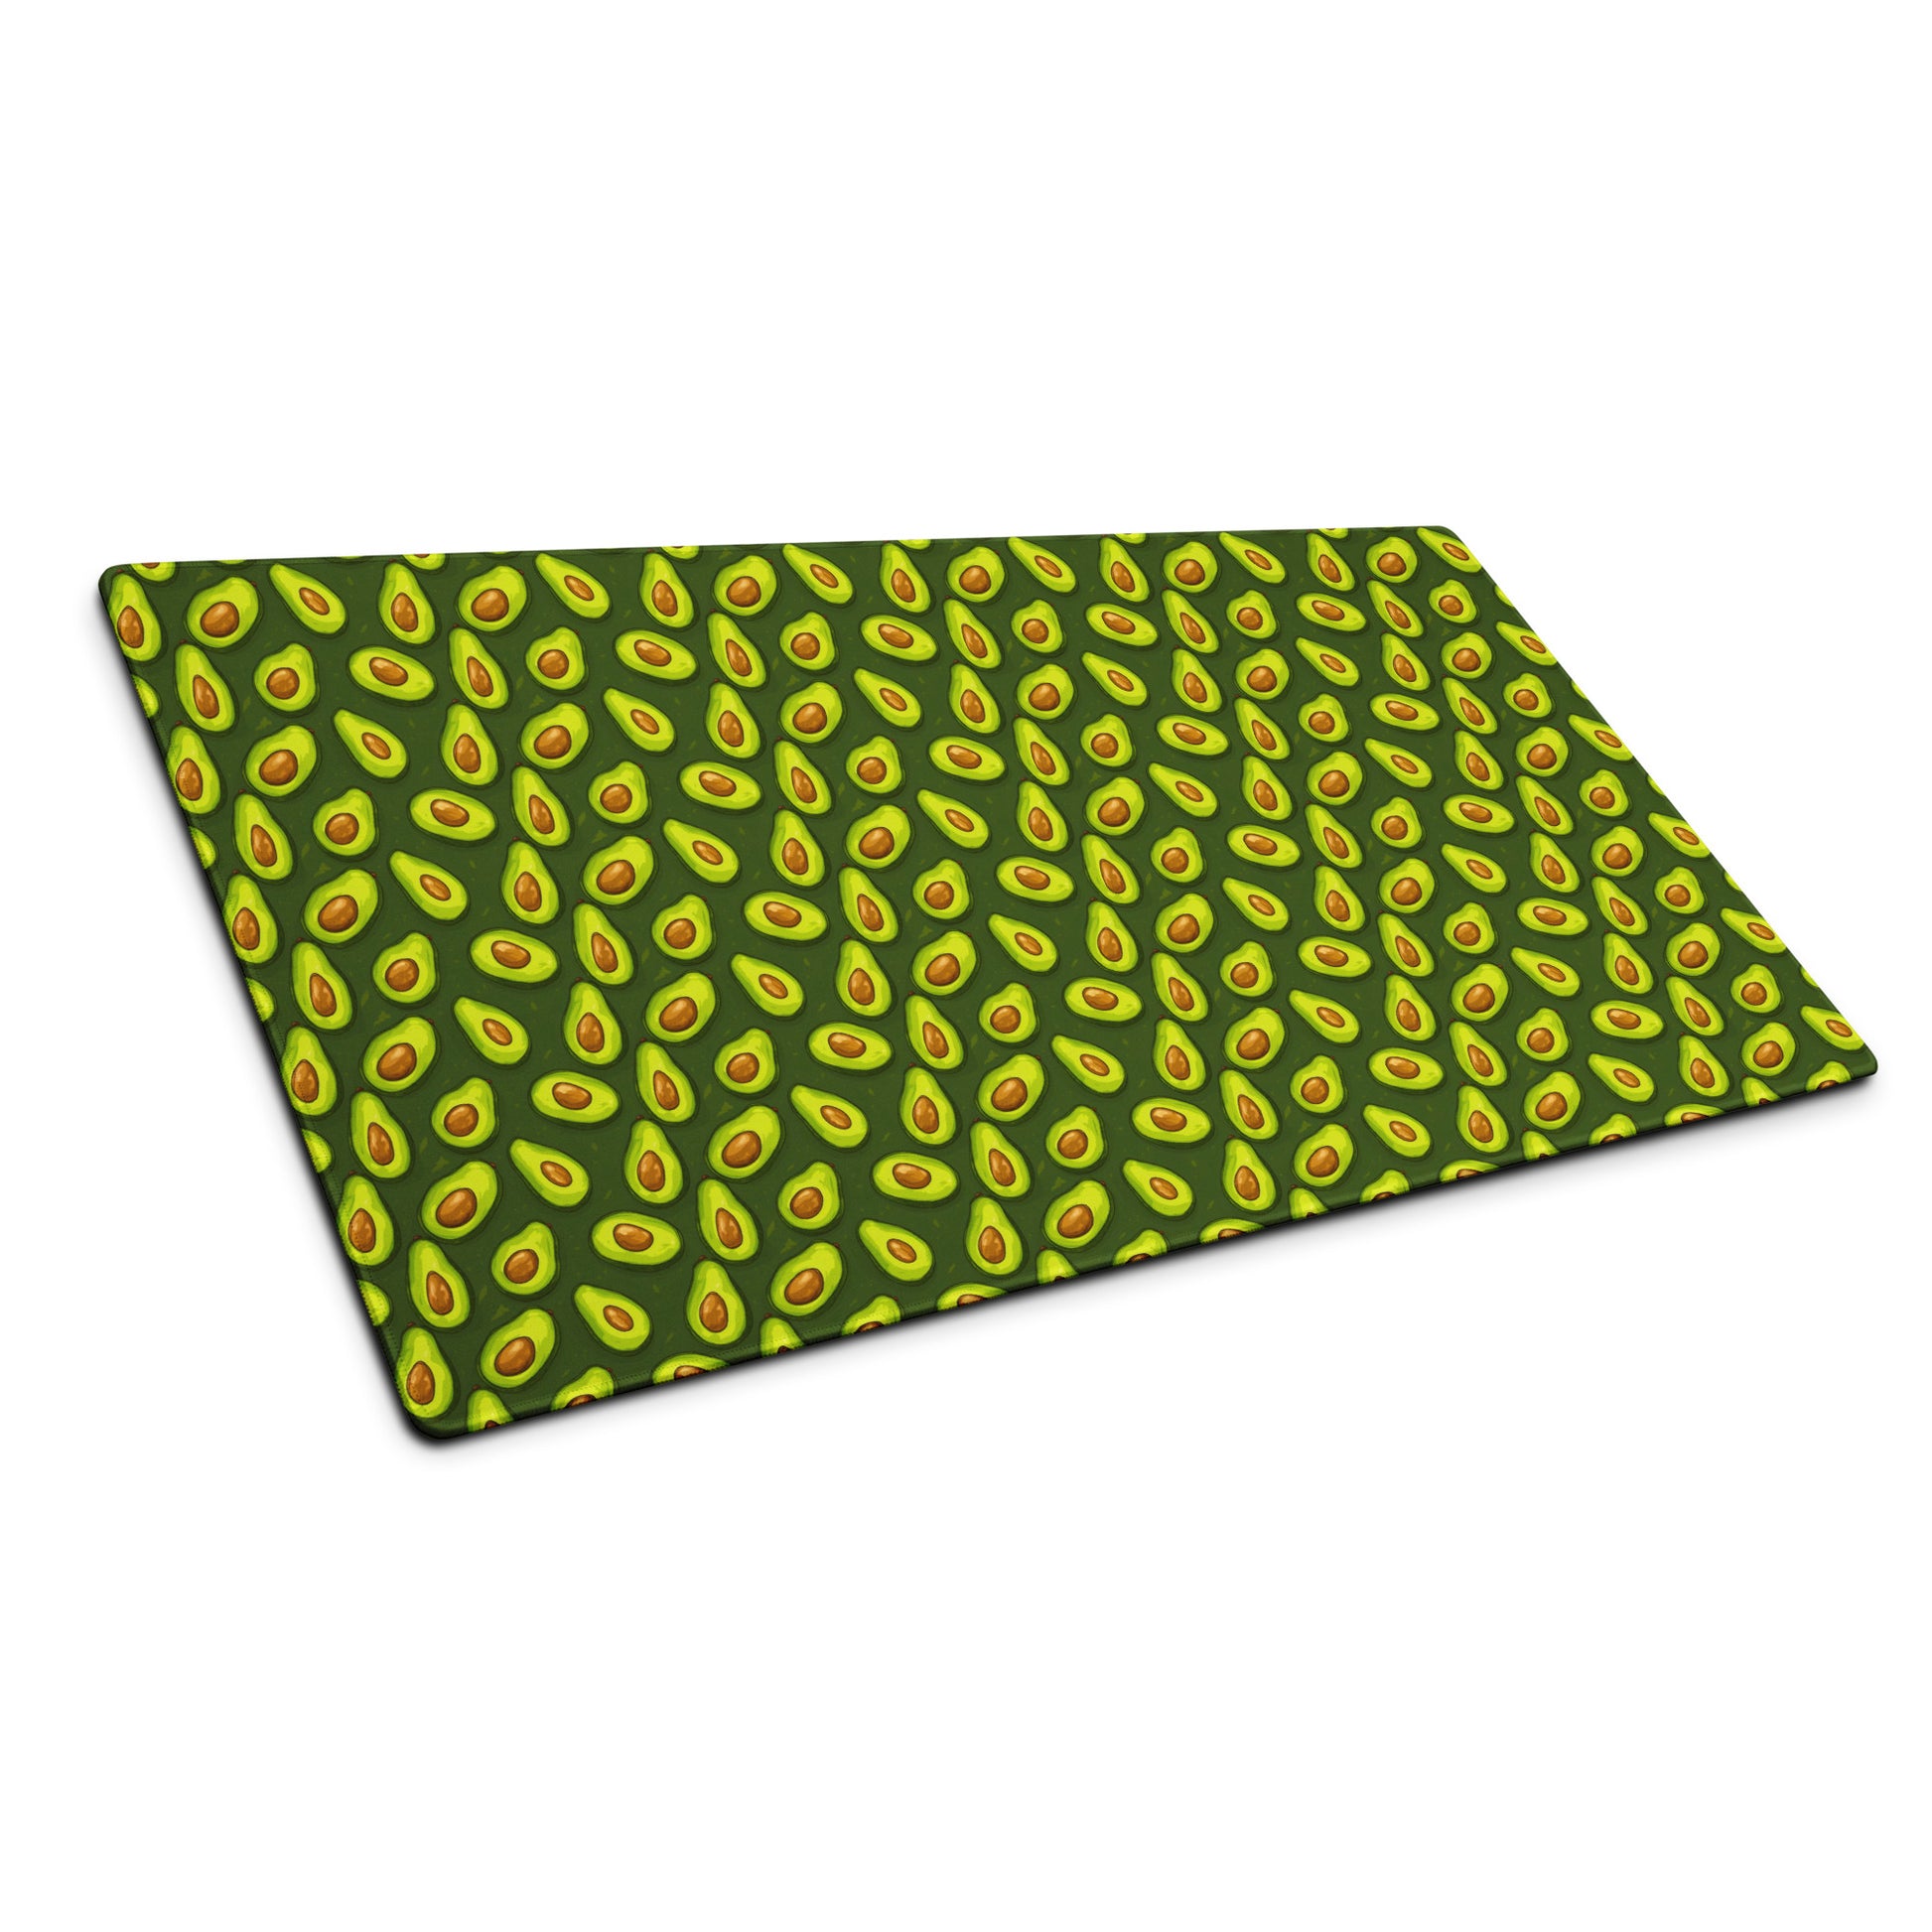 A 36" x 18" desk pad with lots of avocados on it shown at an angle. Green in color.